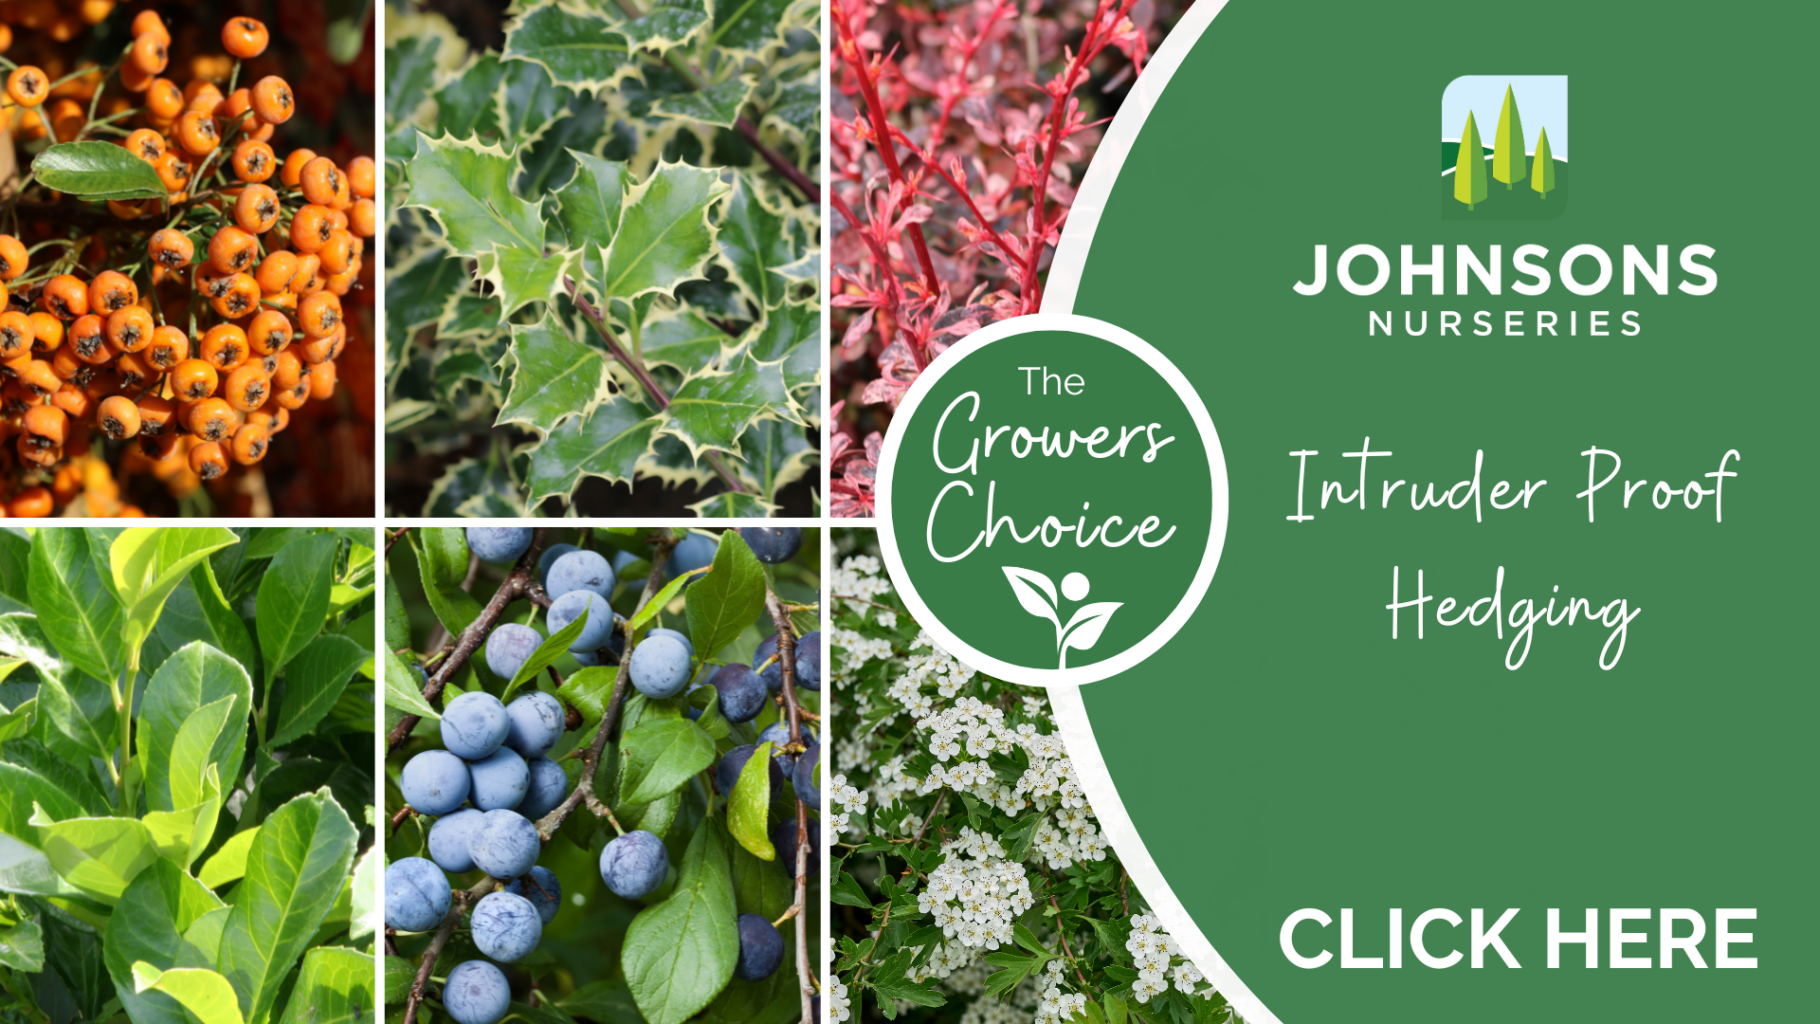 The Growers Choice: Intruder proof hedging